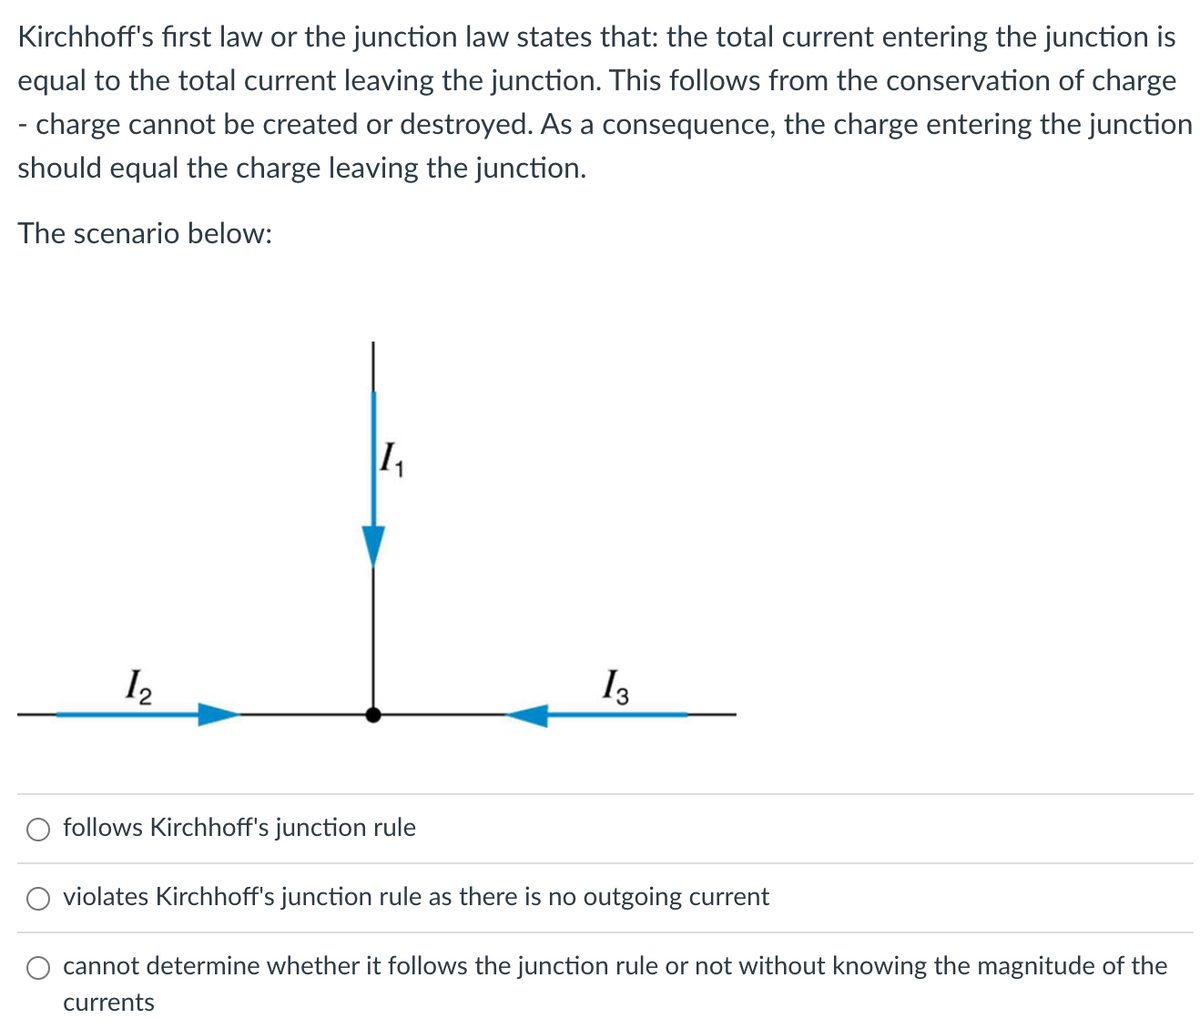 Kirchhoff's first law or the junction law states that: the total current entering the junction is
equal to the total current leaving the junction. This follows from the conservation of charge
- charge cannot be created or destroyed. As a consequence, the charge entering the junction
should equal the charge leaving the junction.
The scenario below:
12
1₁
13
follows Kirchhoff's junction rule
violates Kirchhoff's junction rule as there is no outgoing current
cannot determine whether it follows the junction rule or not without knowing the magnitude of the
currents